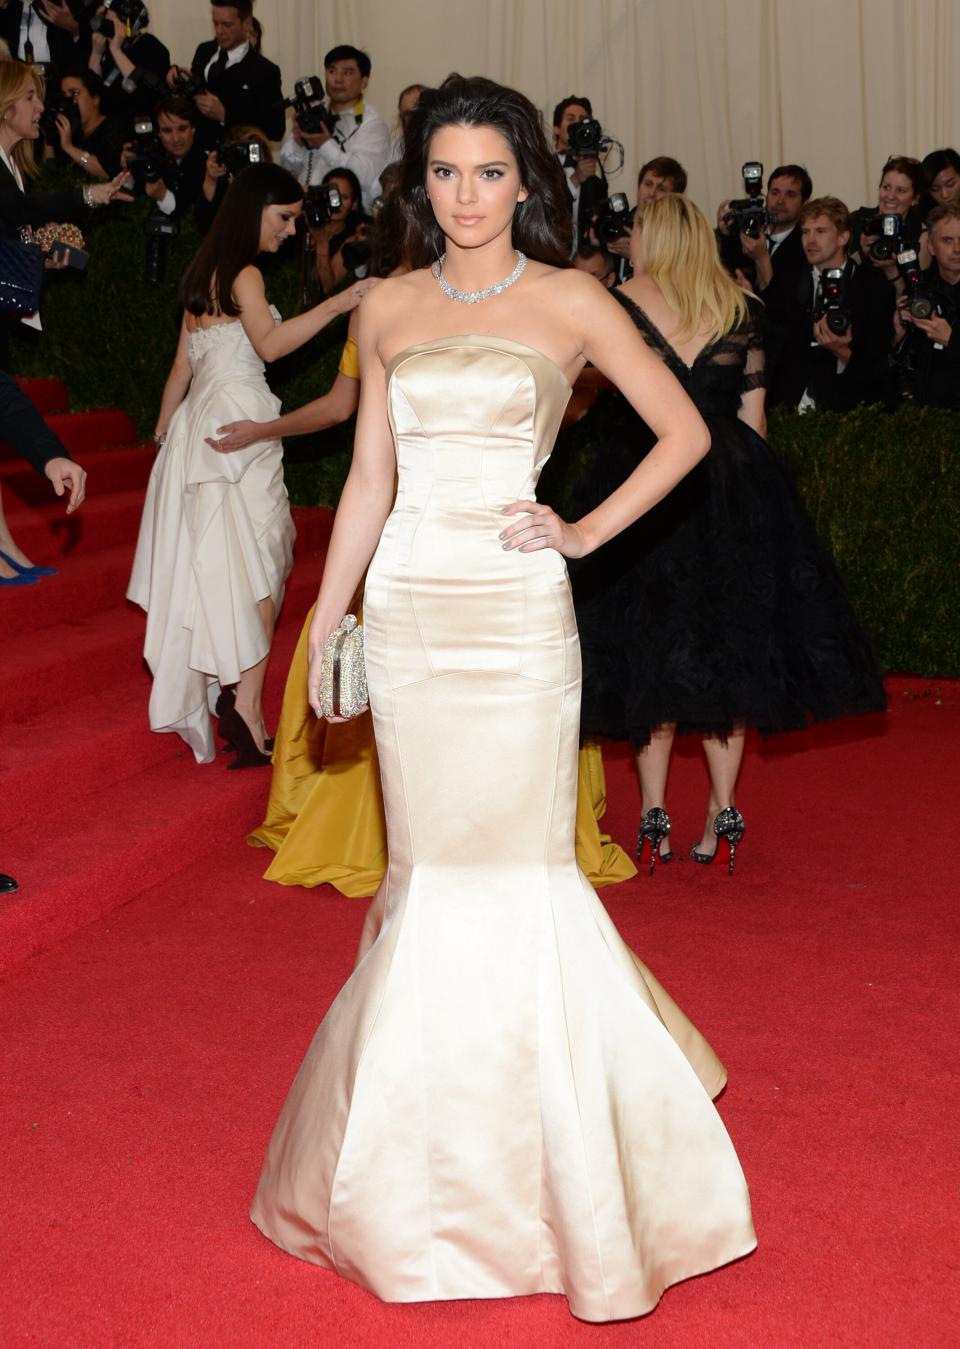 Kendall Jenner attends The Metropolitan Museum of Art's Costume Institute benefit gala celebrating &quot;Charles James: Beyond Fashion&quot; on Monday, May 5, 2014, in New York. (Photo by Evan Agostini/Invision/AP)